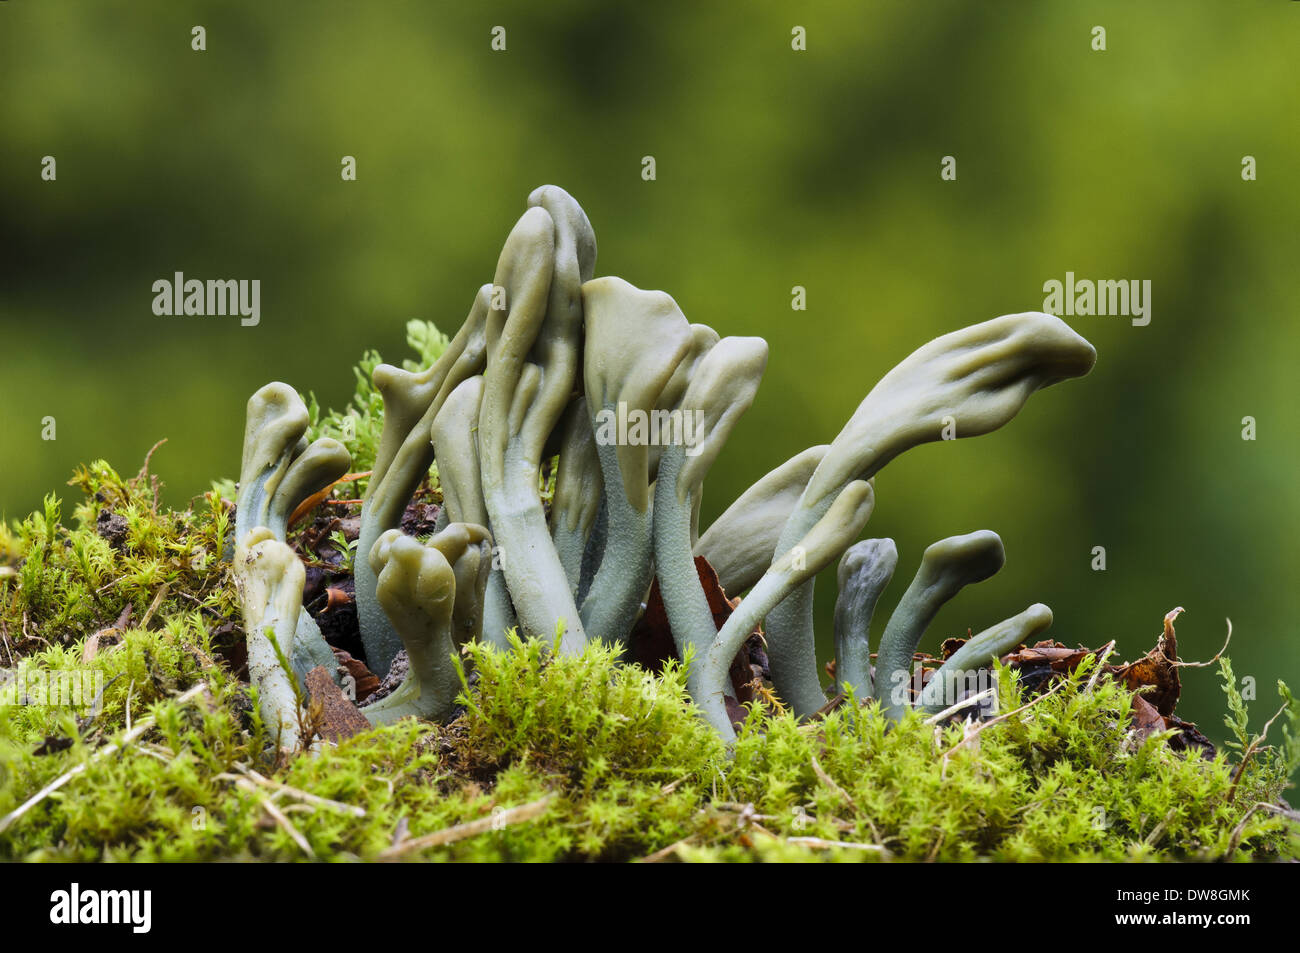 Green Earthtongue (Microglossum viride) fruiting bodies growing from mossy ground Clumber Park Nottinghamshire England September Stock Photo